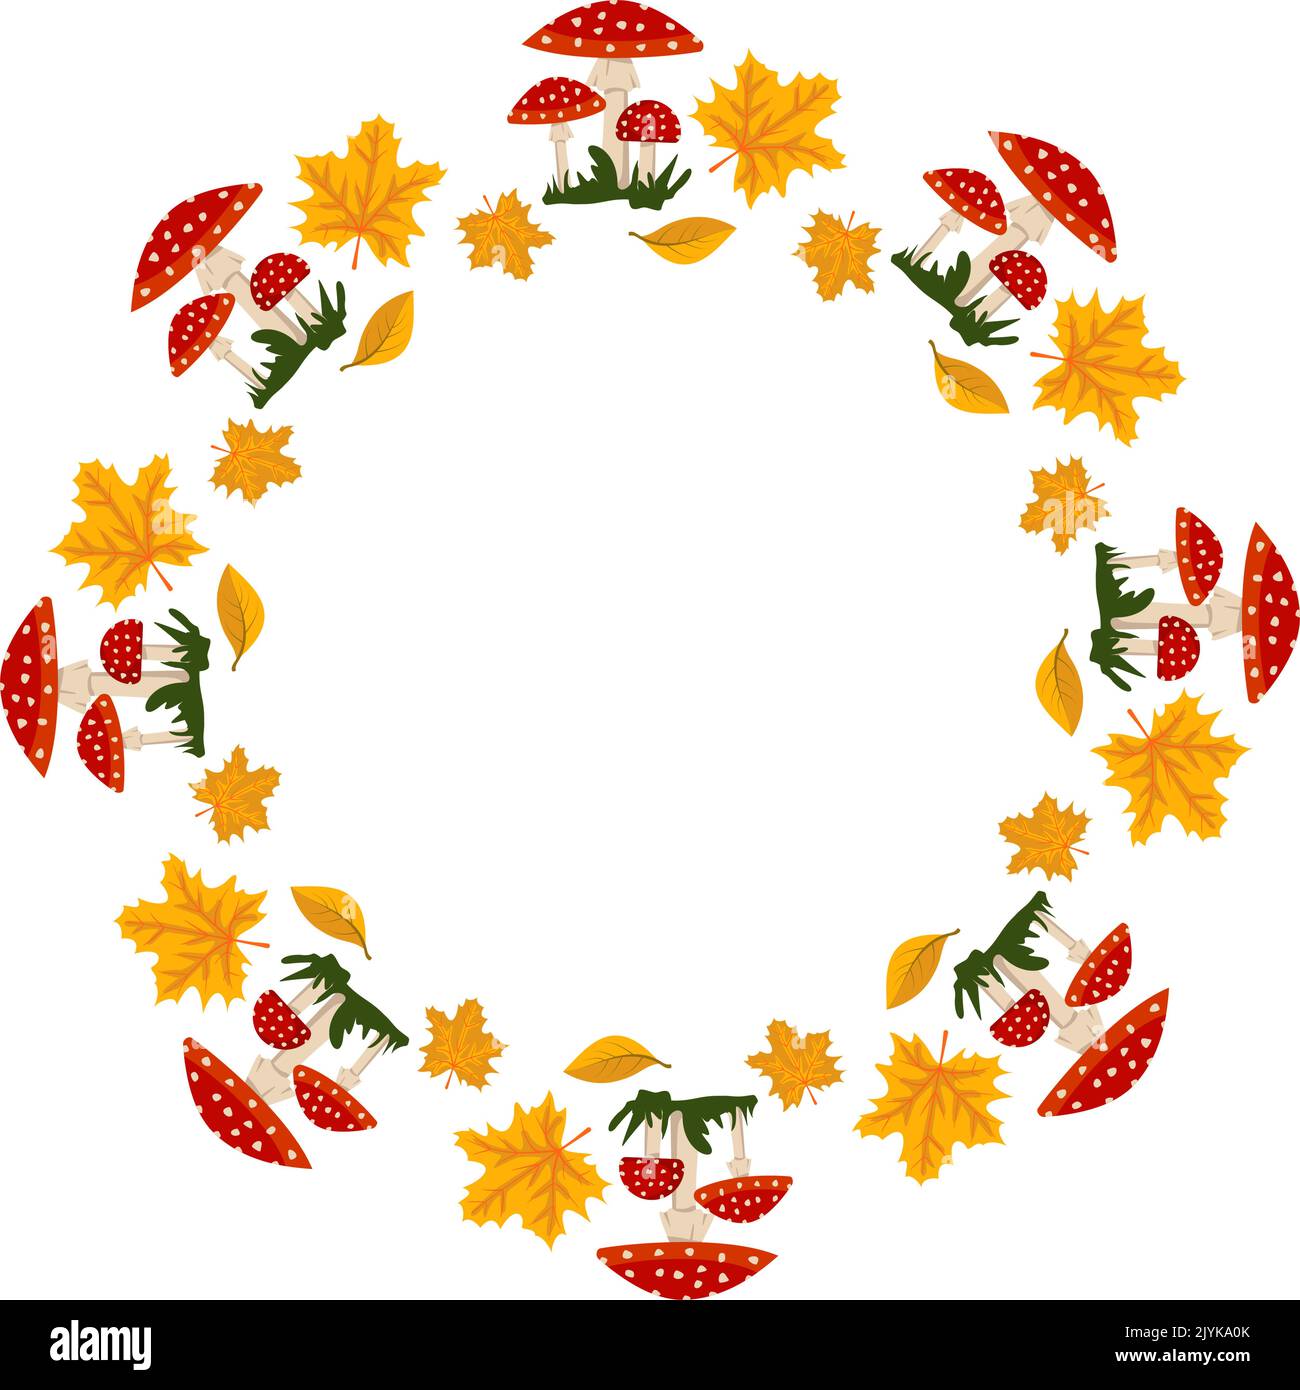 Round frame with red fly agaric mushroom with white dots and yellow maple leaves. Bright autumn wreath with gifts of nature and empty space for text. Decoration for halloween and holiday Stock Vector